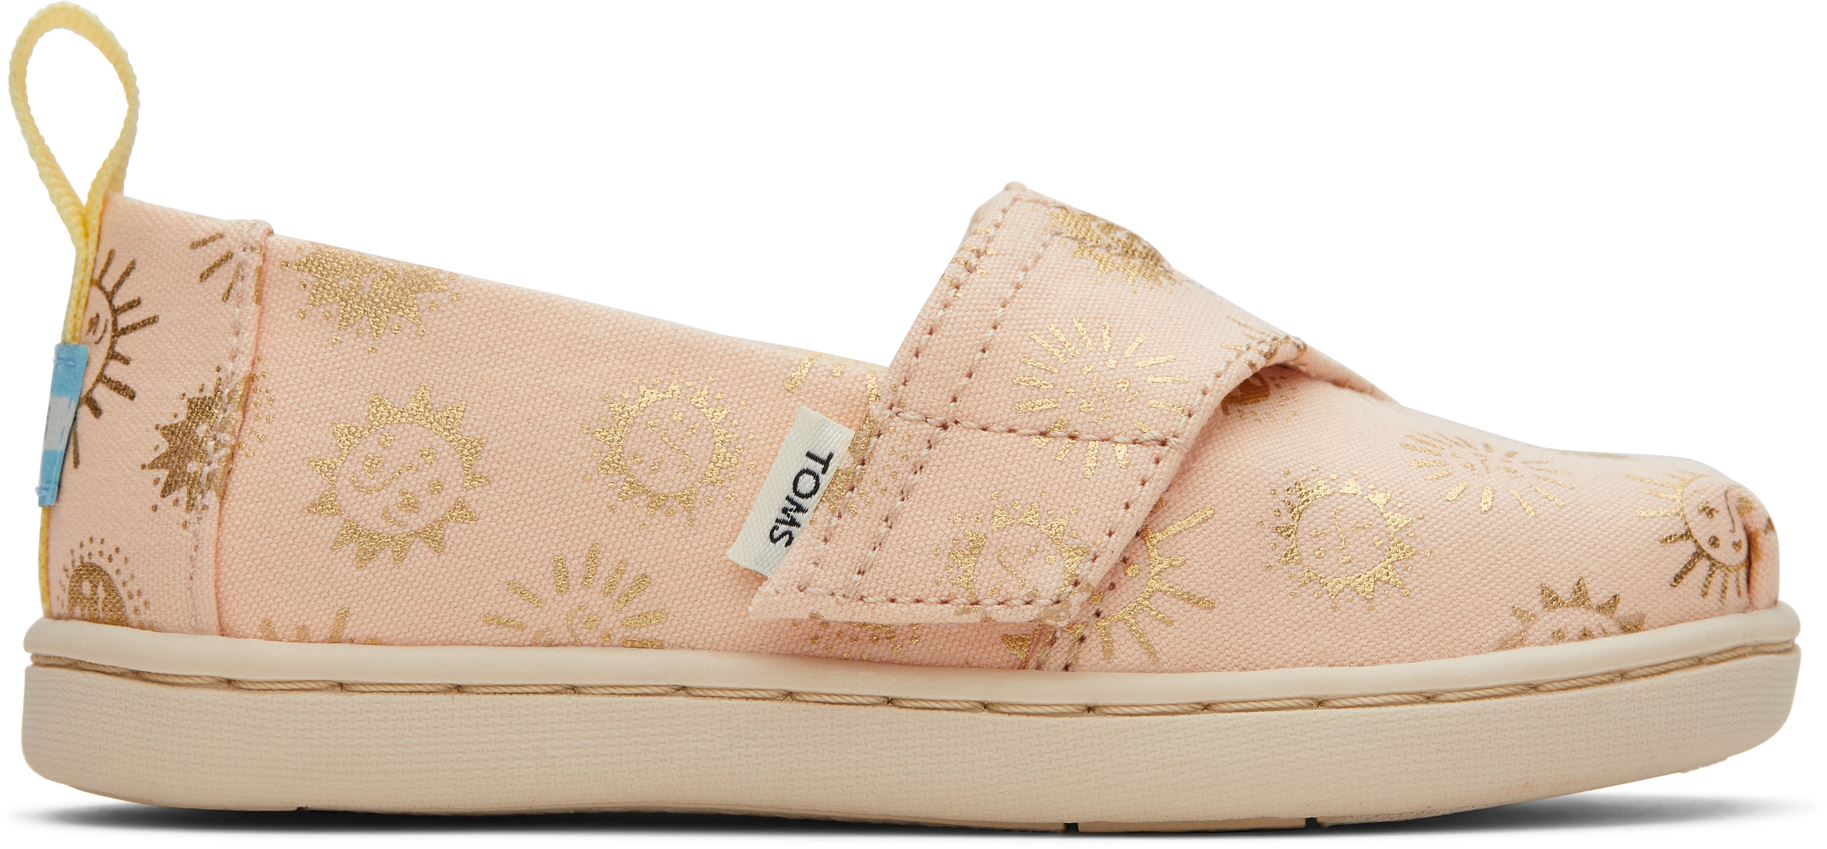 A girls canvas shoe by TOMS, style Alpargata Sunny Days, in apricot with gold foil detail and a velcro strap. Right side view.